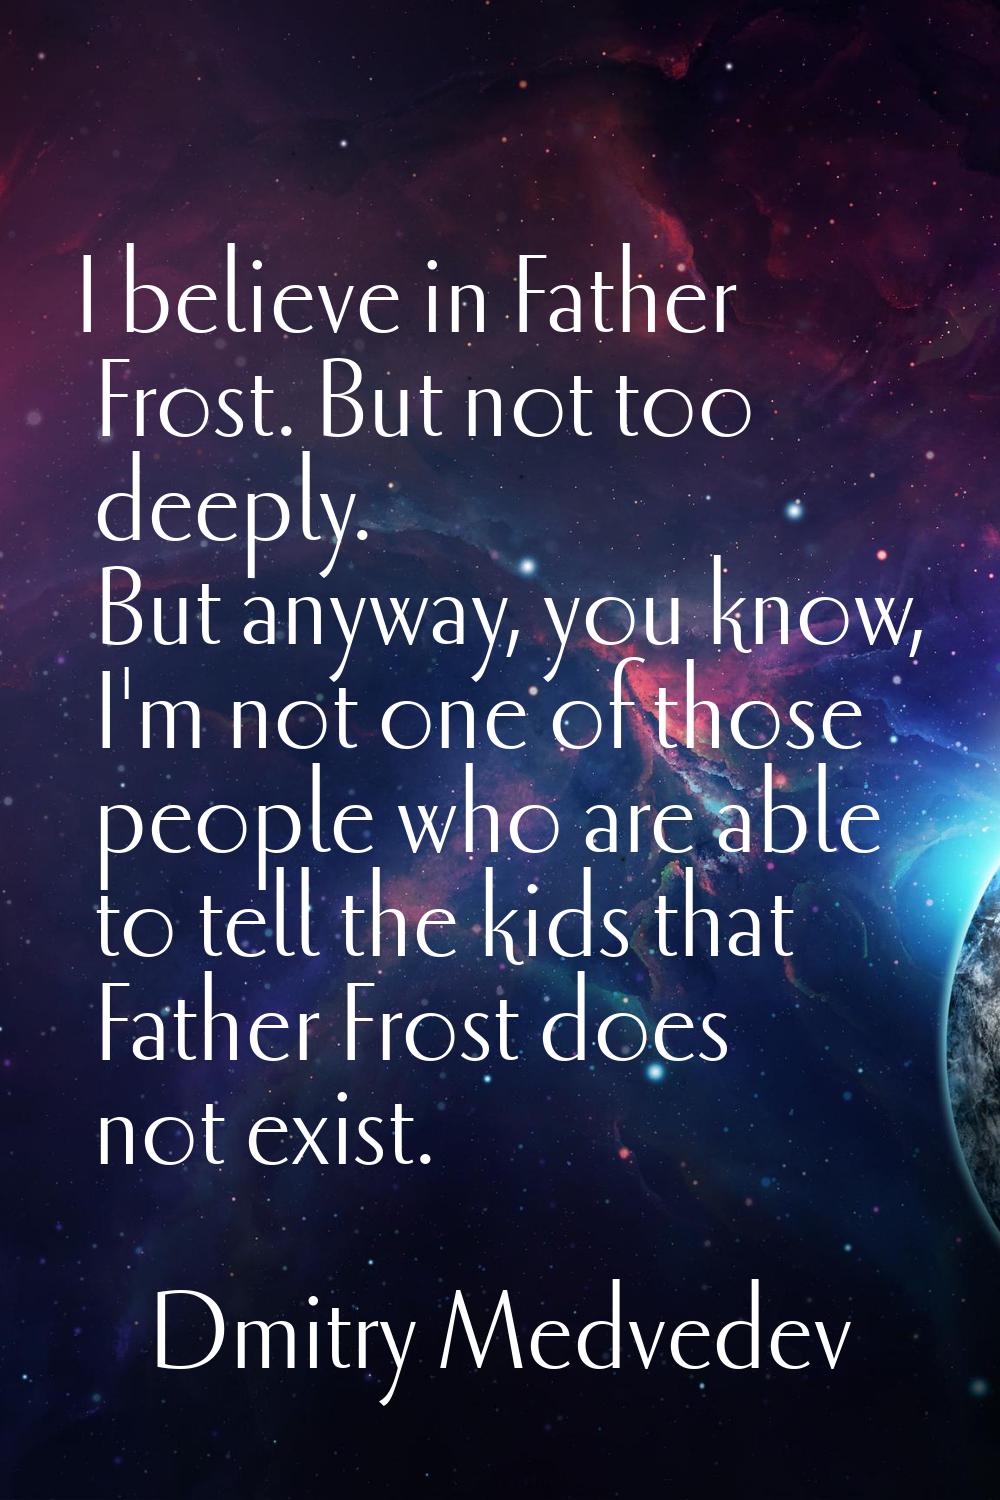 I believe in Father Frost. But not too deeply. But anyway, you know, I'm not one of those people wh